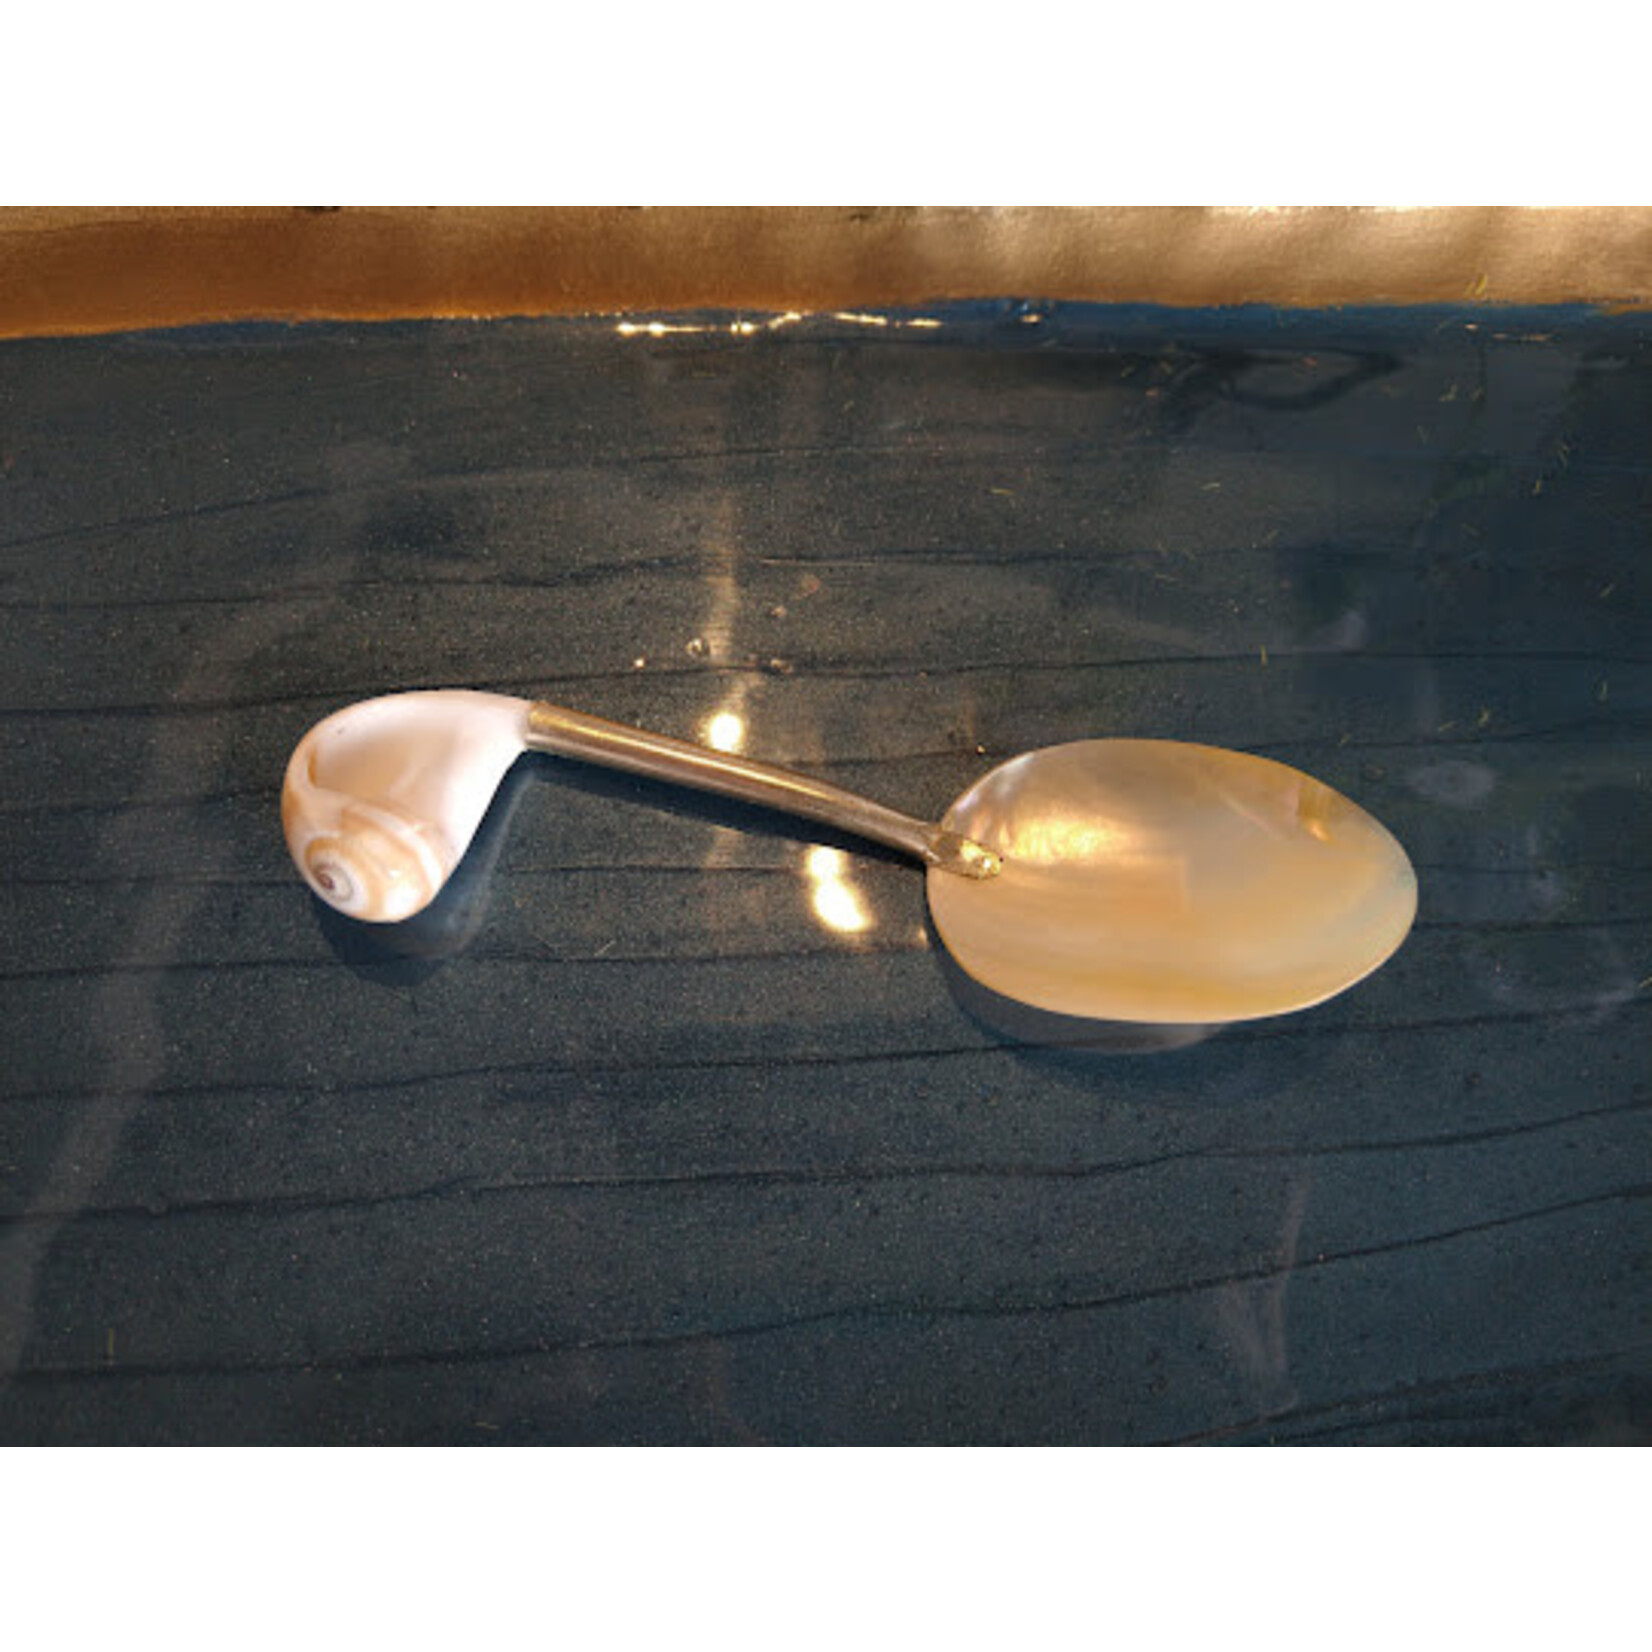 Two's Company Fancy Mother of Pearl Serving Spoon